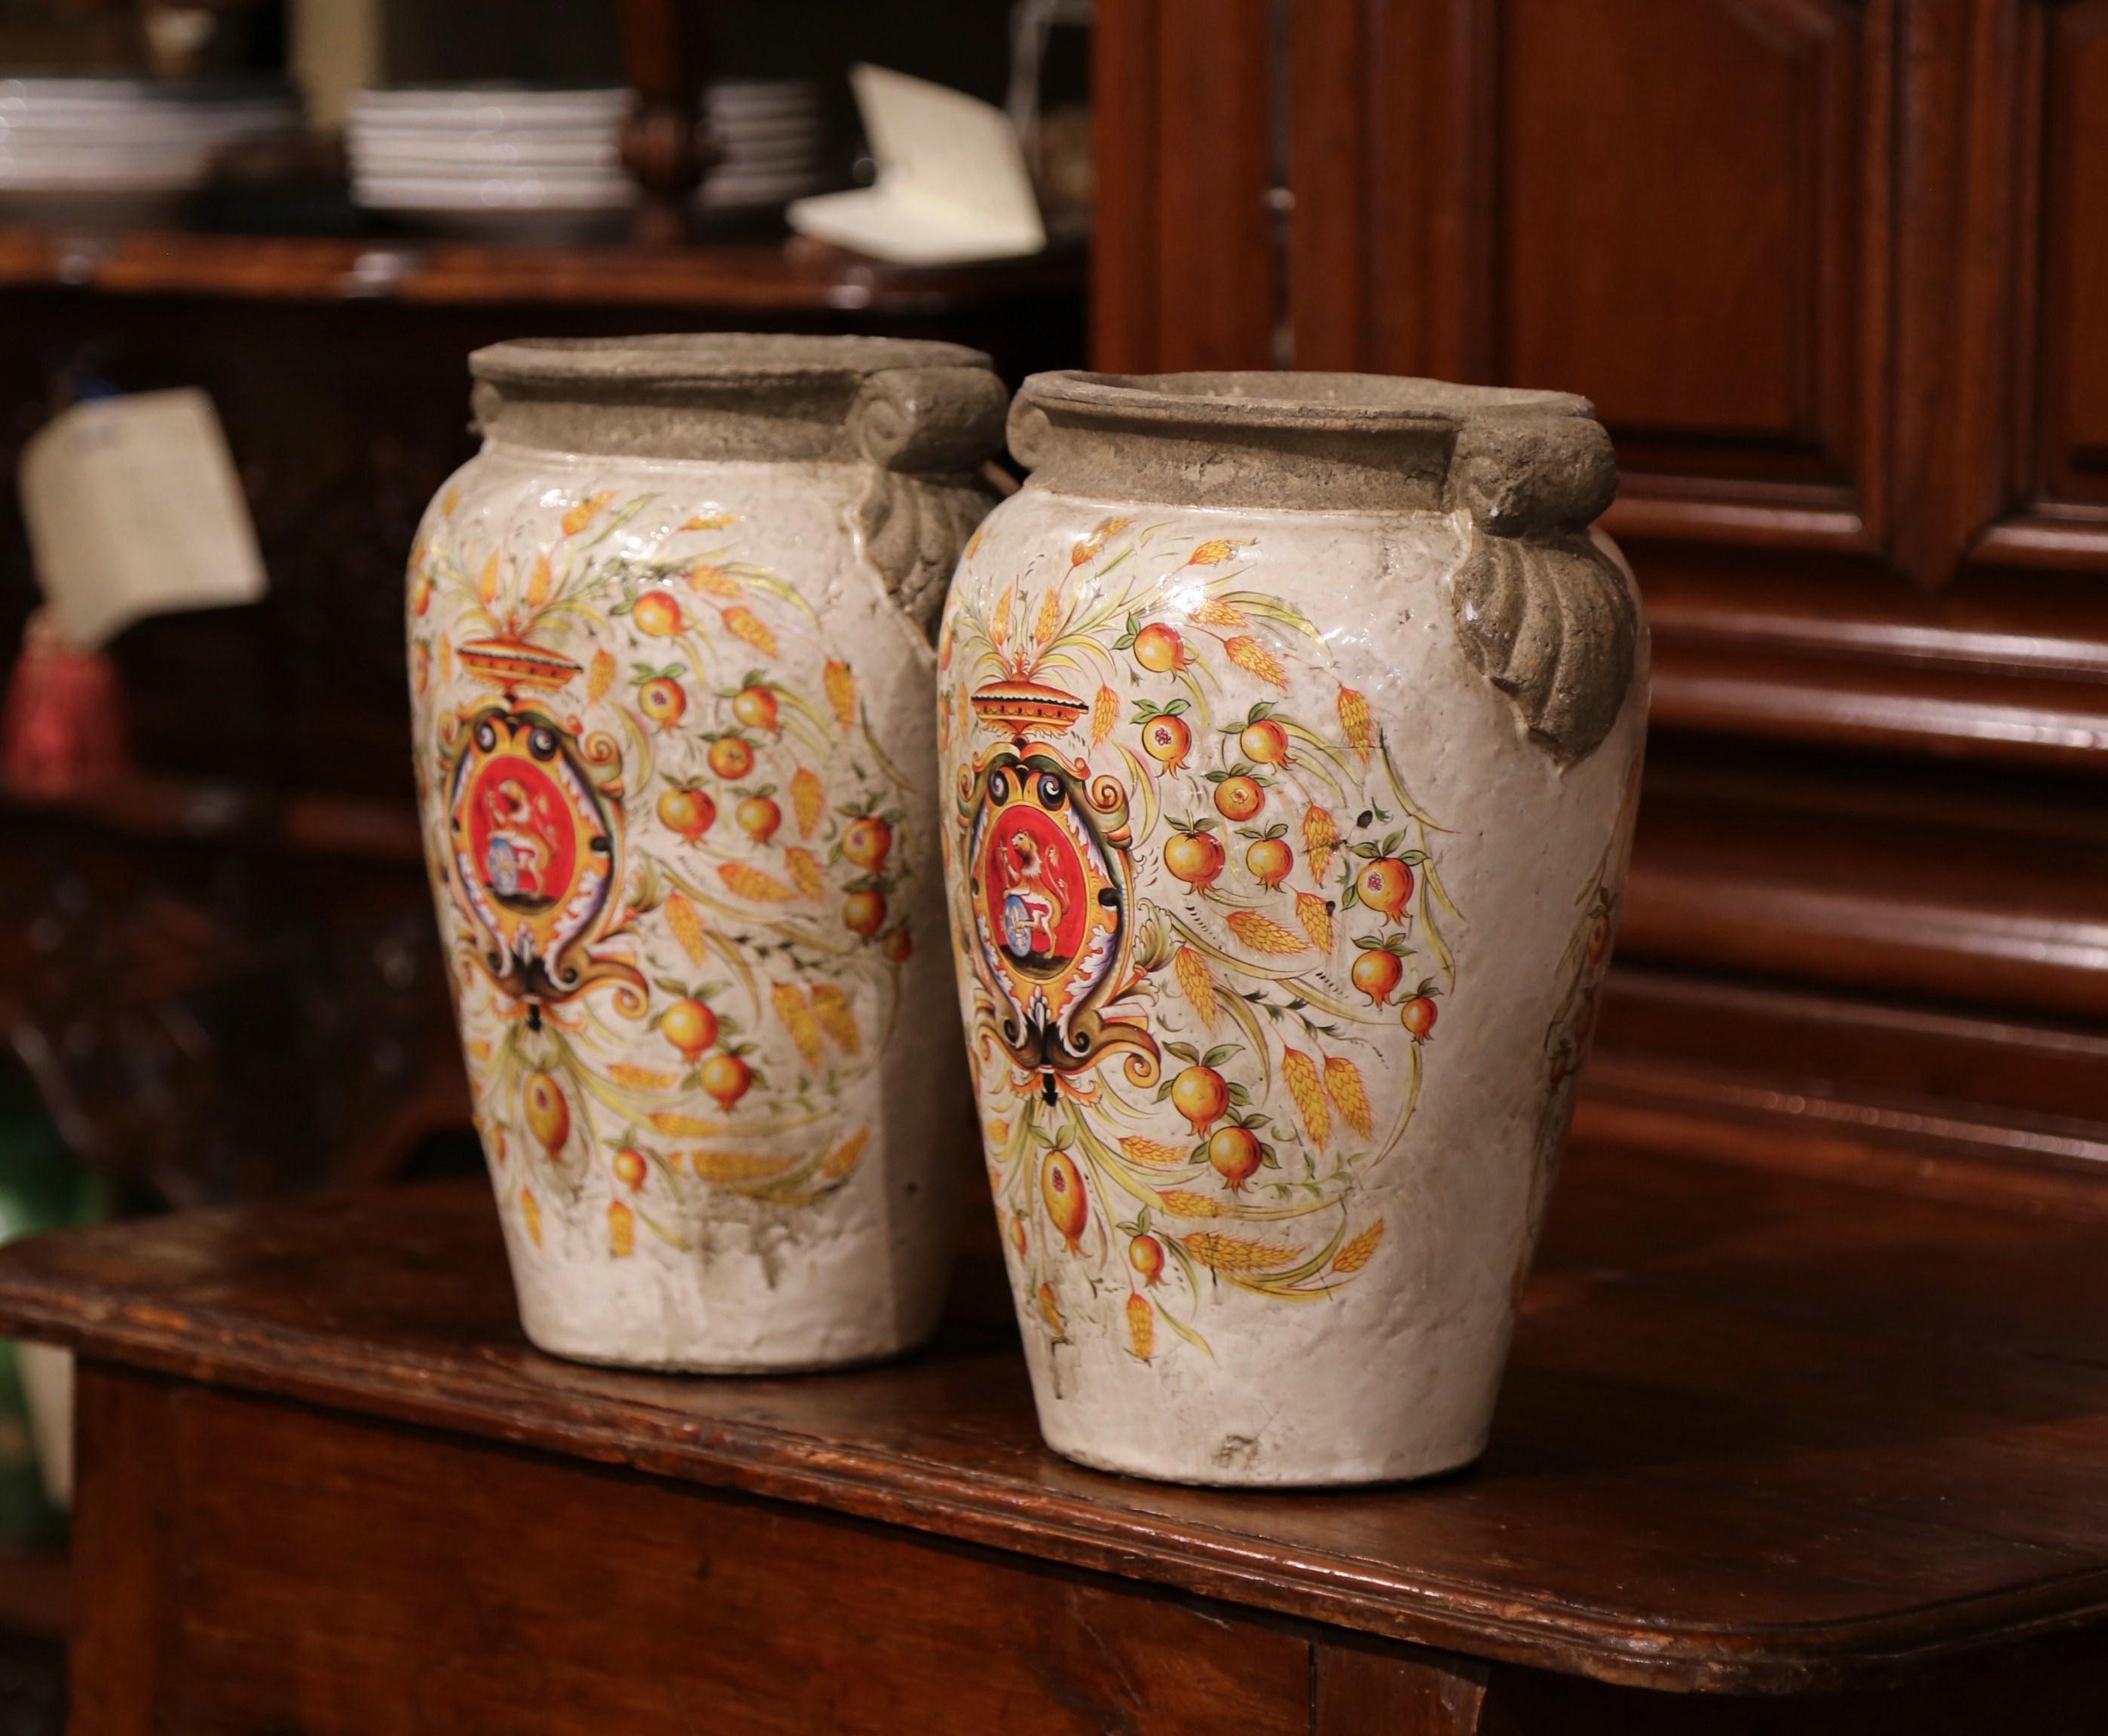 Decorate your mantel with this elegant, colorful pair of vases from Italy. The large, decorative vases are round in shape with small handles on both sides. The ceramic pots feature hand painted colorful decor on both sides, which includes a crest,